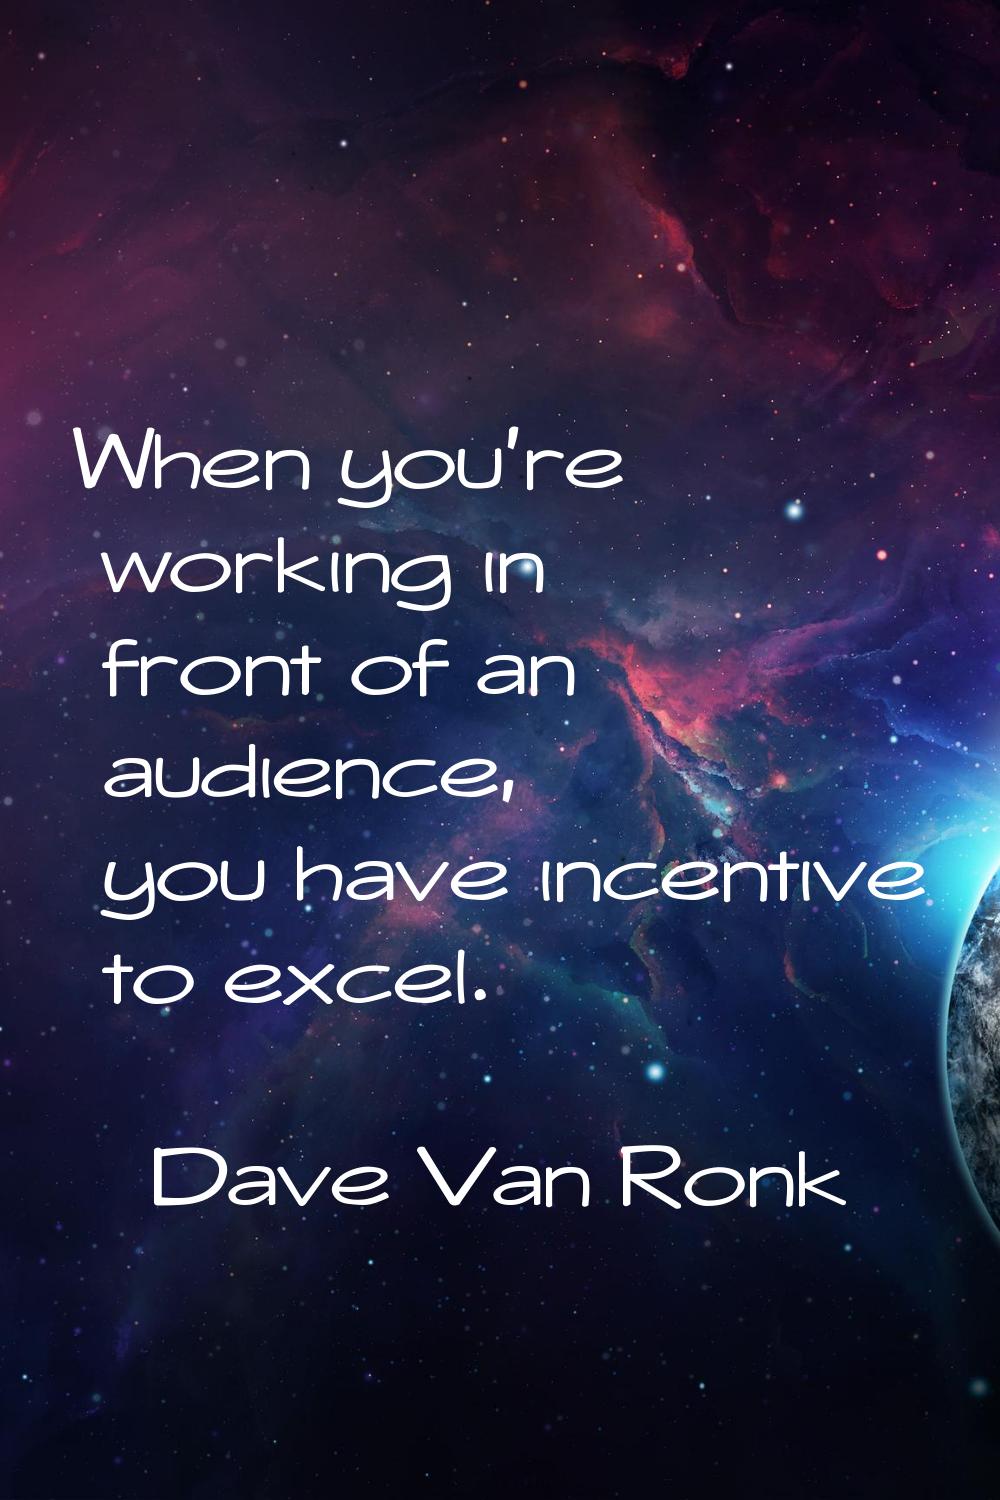 When you're working in front of an audience, you have incentive to excel.